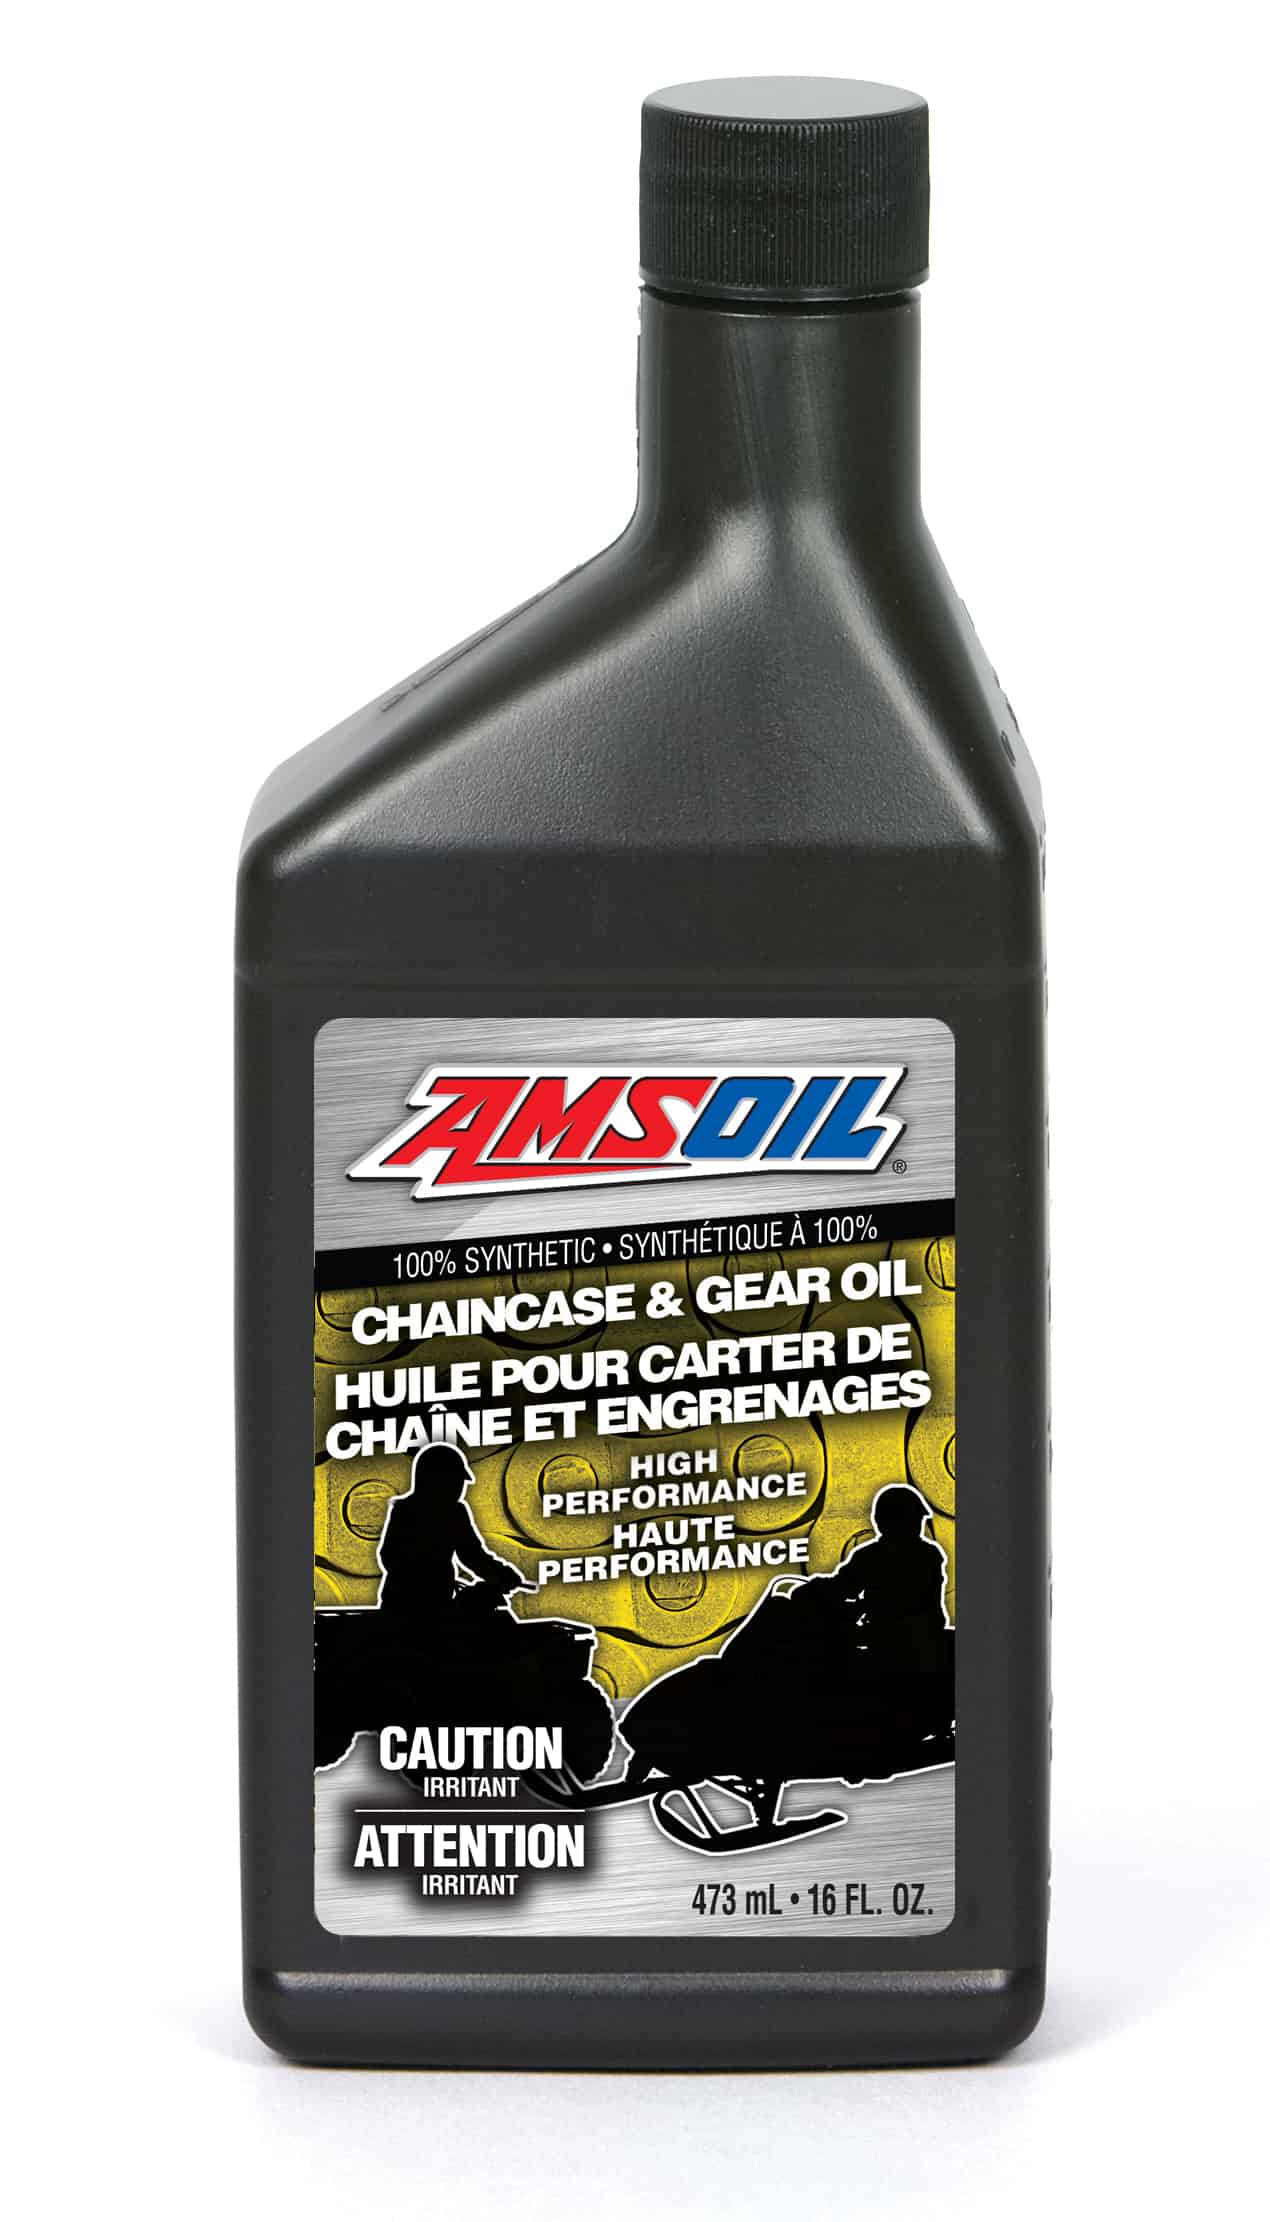 A bottle of Synthetic Chaincase & Gear Oil. It provides superior protection for enclosed chains and gears found in snowmobiles, ATVs and general equipment.